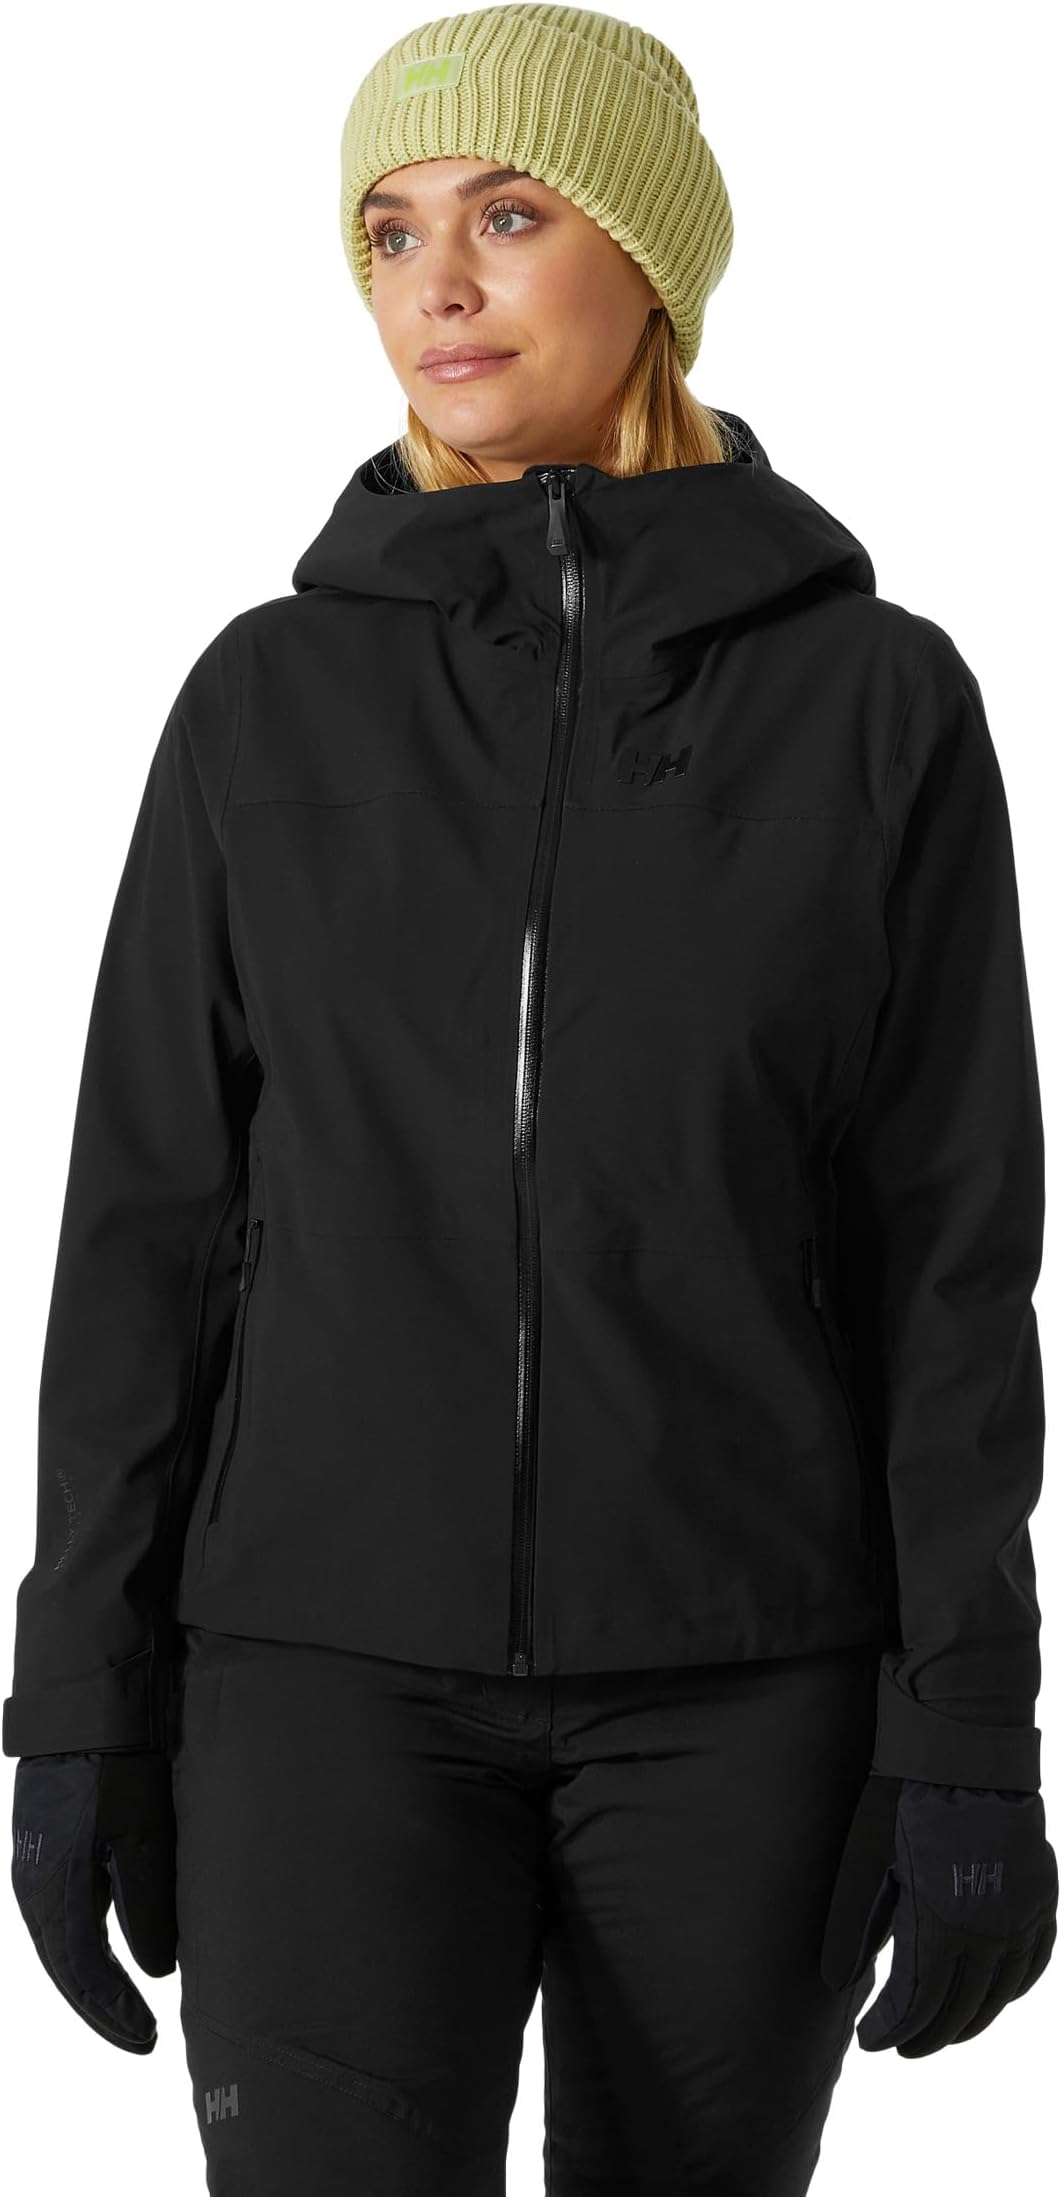 куртка motionista 3l shell jacket helly hansen цвет terrazzo Куртка Motionista 3L Shell Jacket Helly Hansen, черный